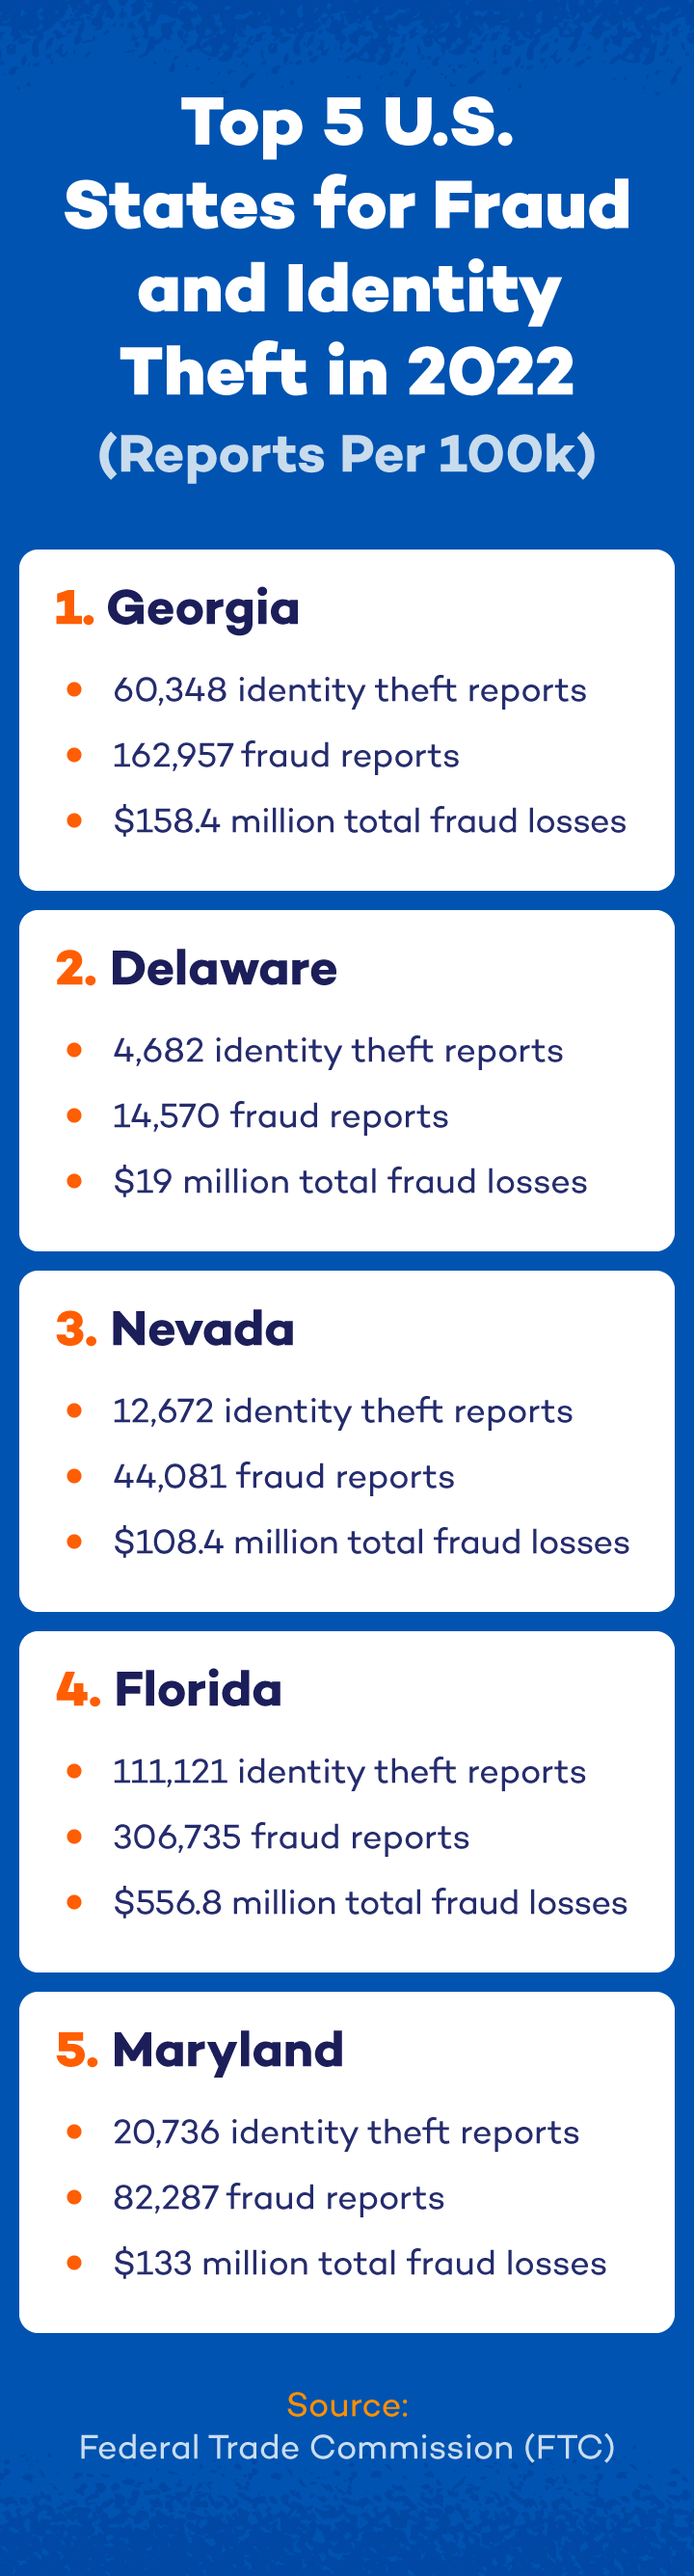 data visual showing top 5 states for fraud, identity theft, and total fraud losses highlighted in orange in 2022